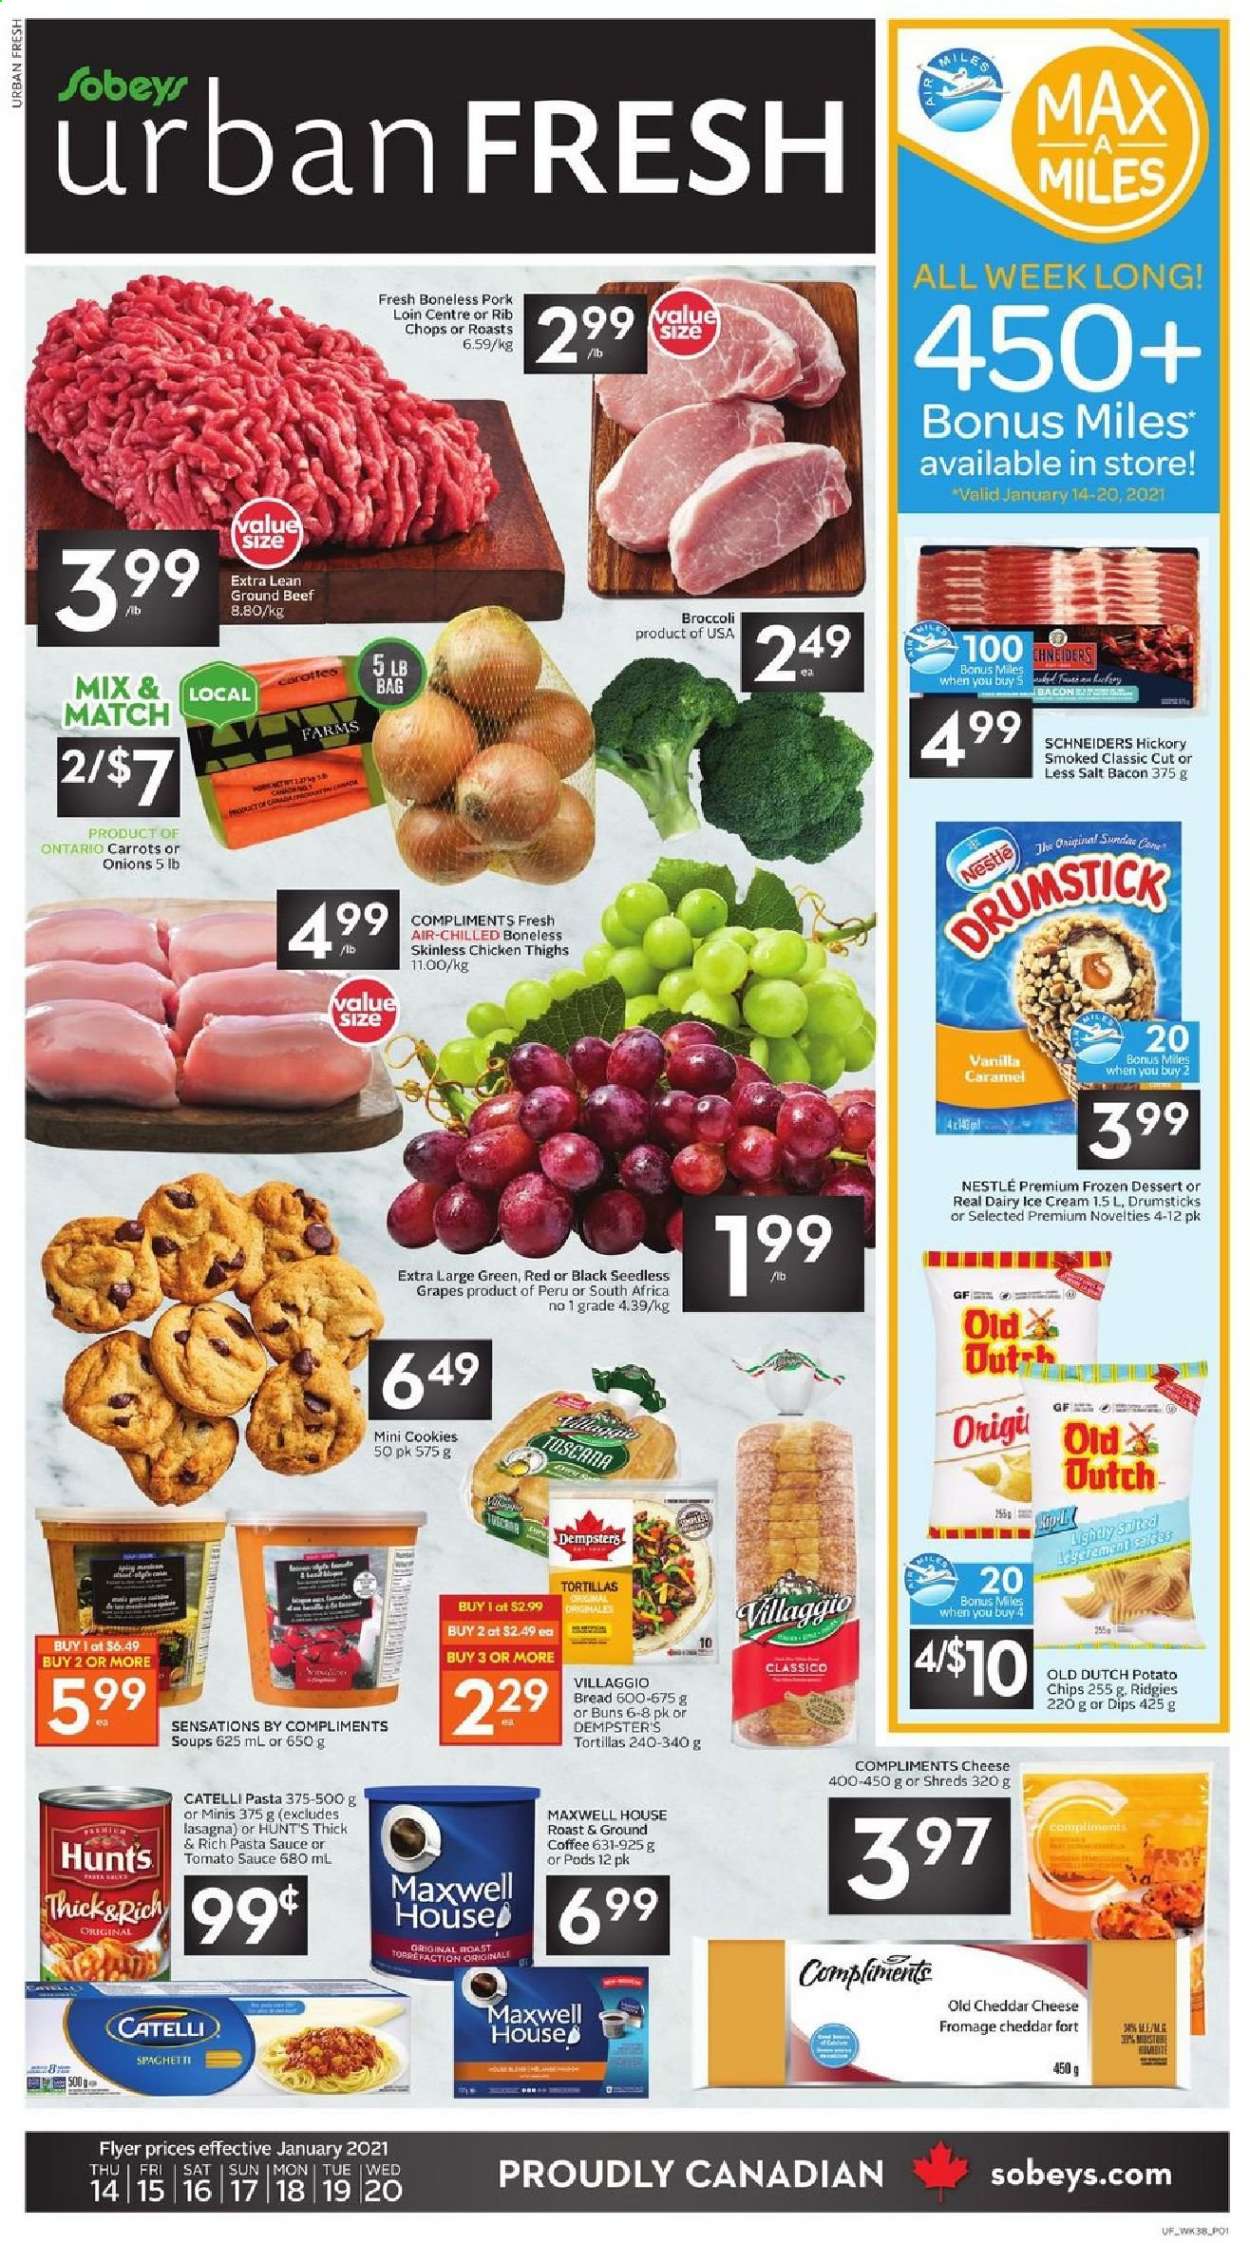 thumbnail - Sobeys Urban Fresh Flyer - January 14, 2021 - January 20, 2021 - Sales products - bread, tortillas, buns, broccoli, carrots, grapes, seedless grapes, spaghetti, pasta sauce, bacon, cheese, ice cream, cookies, potato chips, tomato sauce, caramel, Classico, Maxwell House, coffee, ground coffee, chicken thighs, chicken, beef meat, ground beef, pork loin, pork meat, rib chops, Nestlé. Page 1.